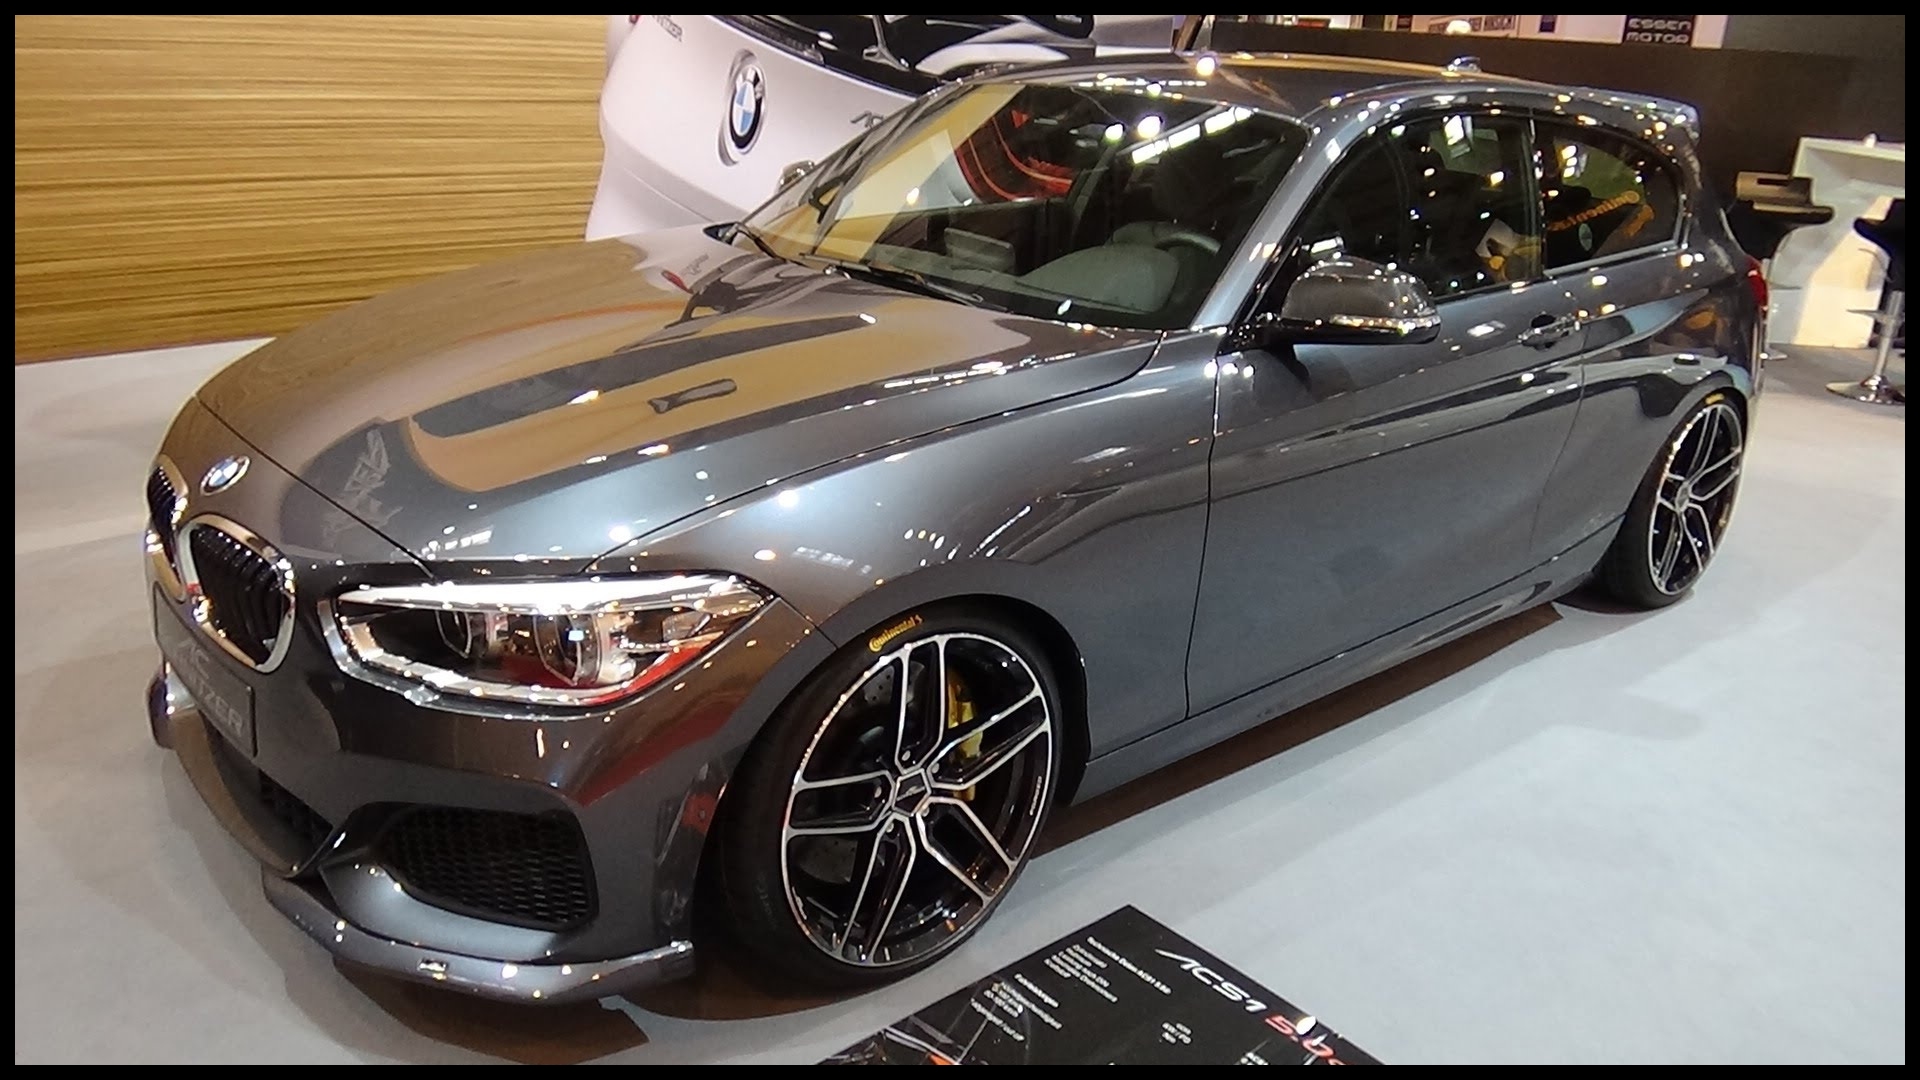 2018 M4 Bmw Price and Review Special 2018 M4 Price 2016 Bmw Acs1 5 0d by